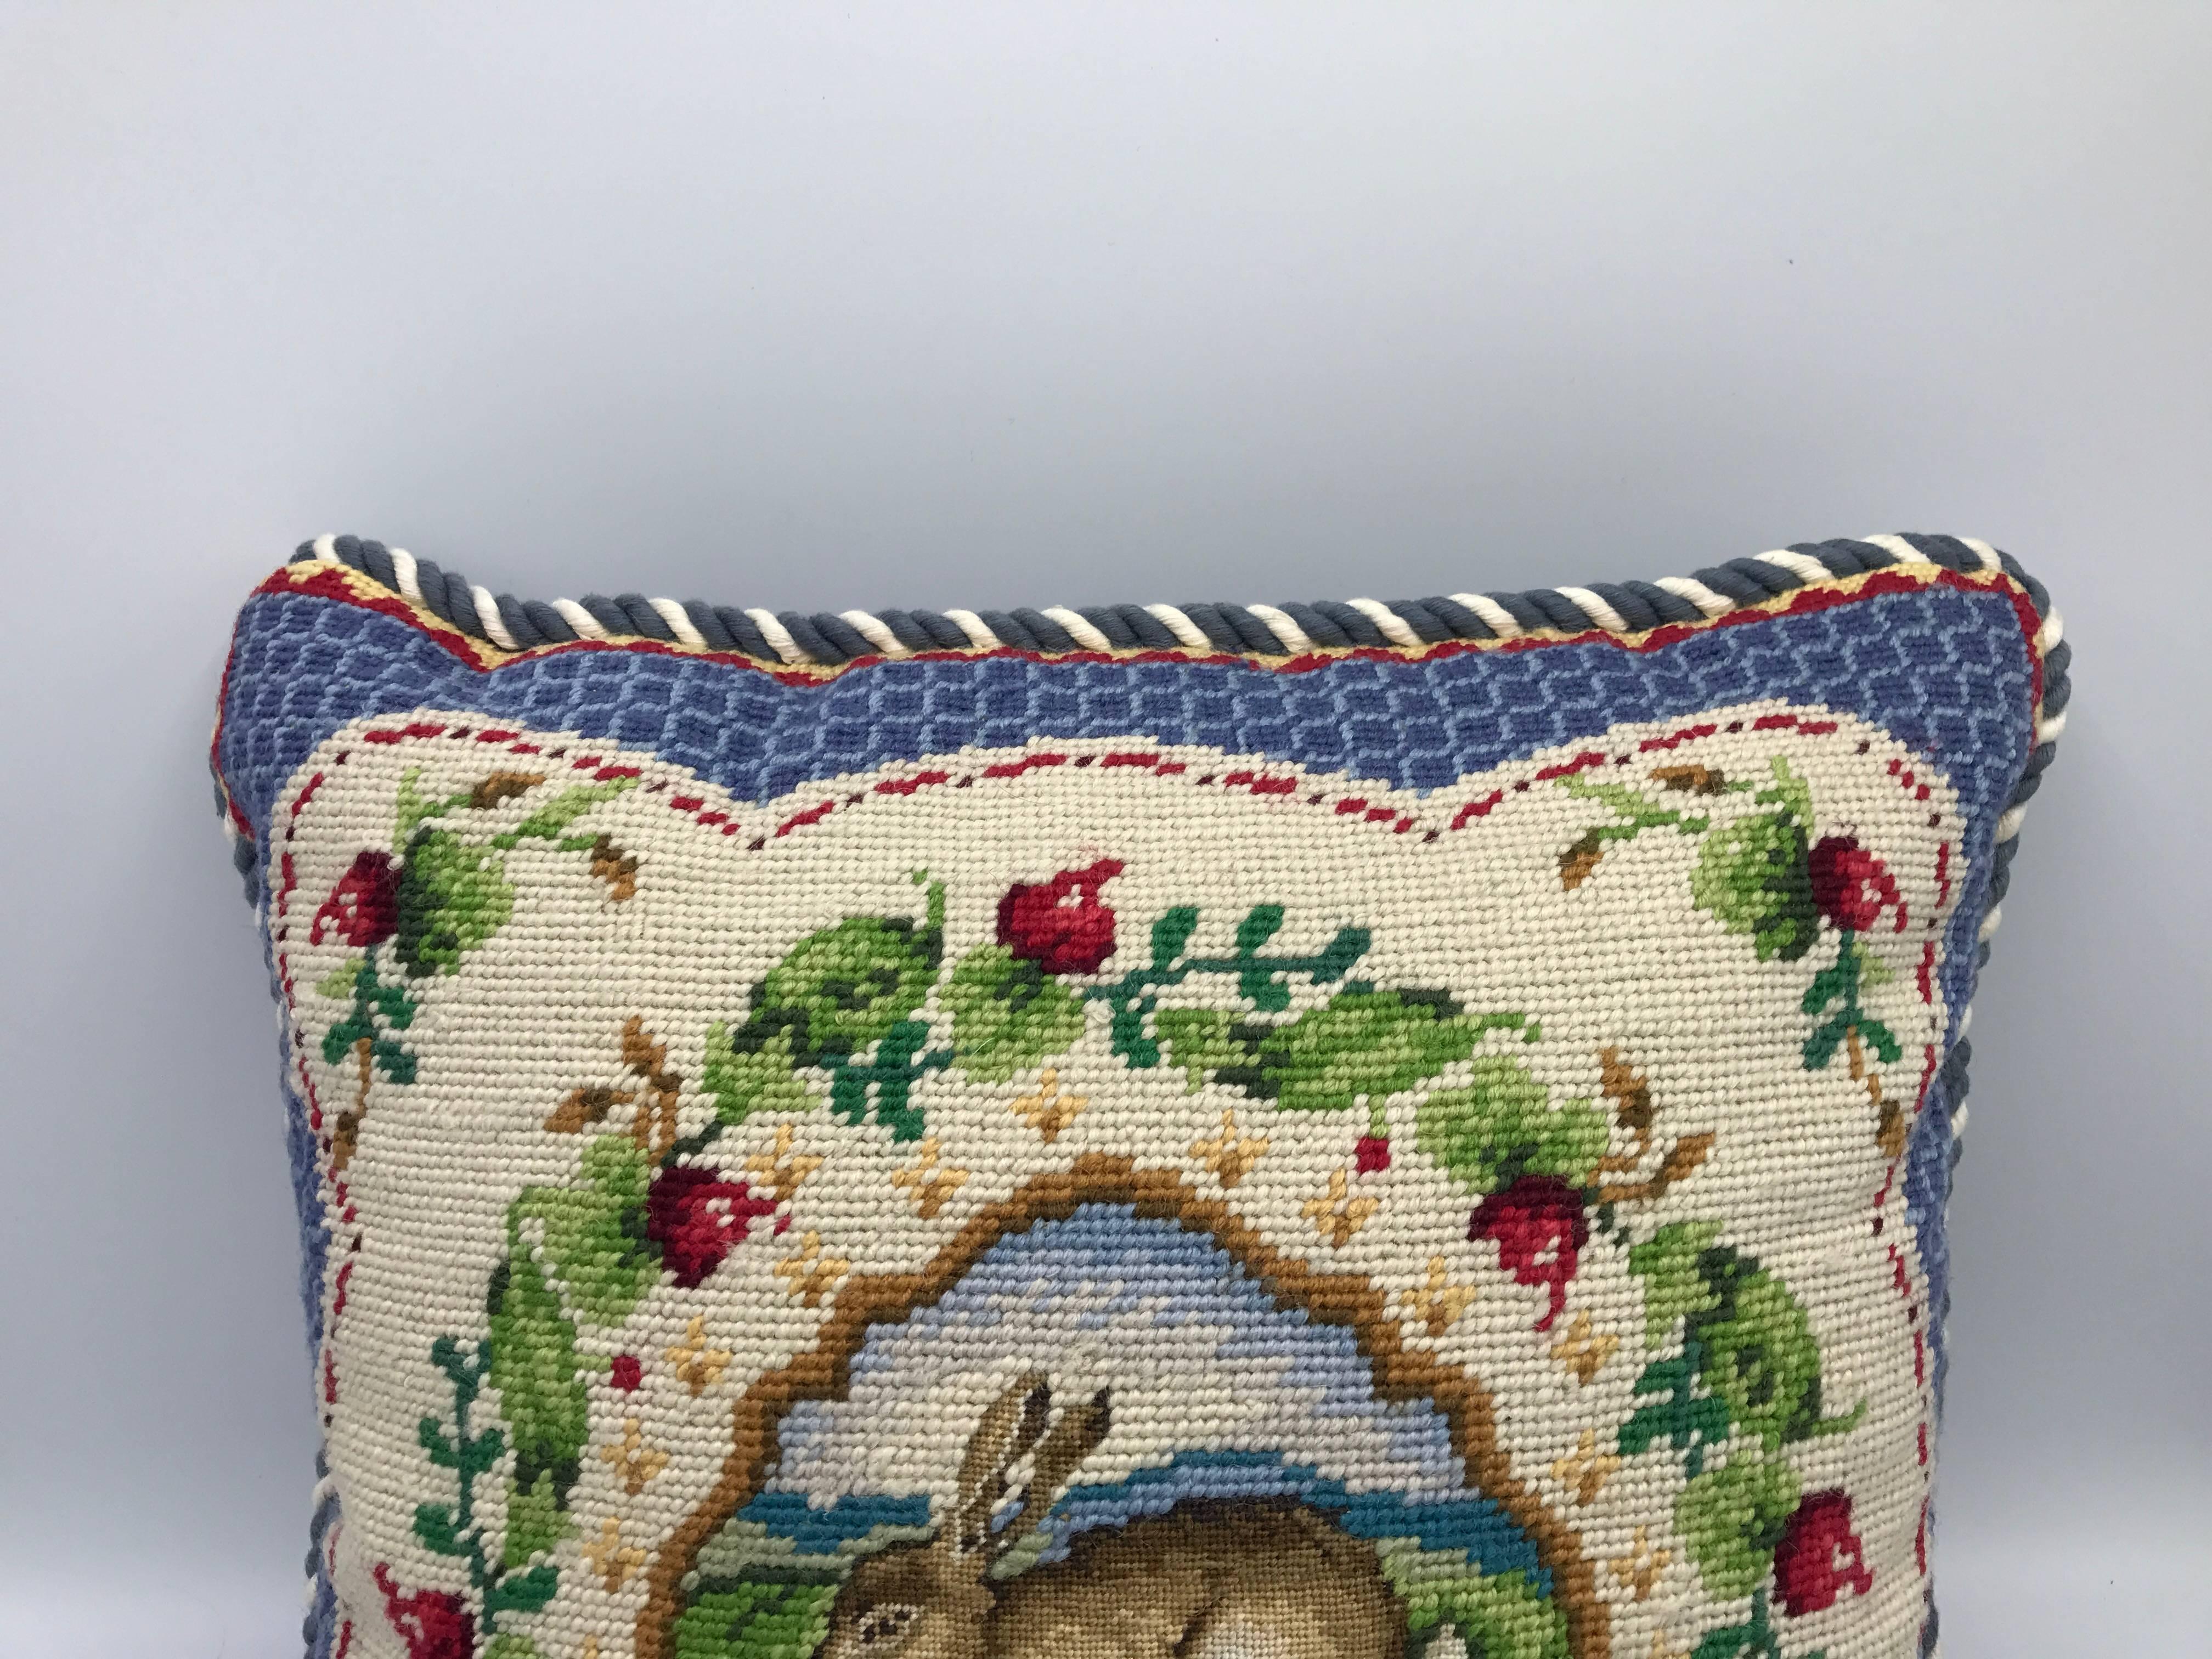 Offered is a stunning, blue and white needlepoint pillow, circa 1960s. The pillow has a floral and rabbit/hare motif. Blue and white piping on all sides. Velvet backing. Poly-blend insert. Zipper closure.